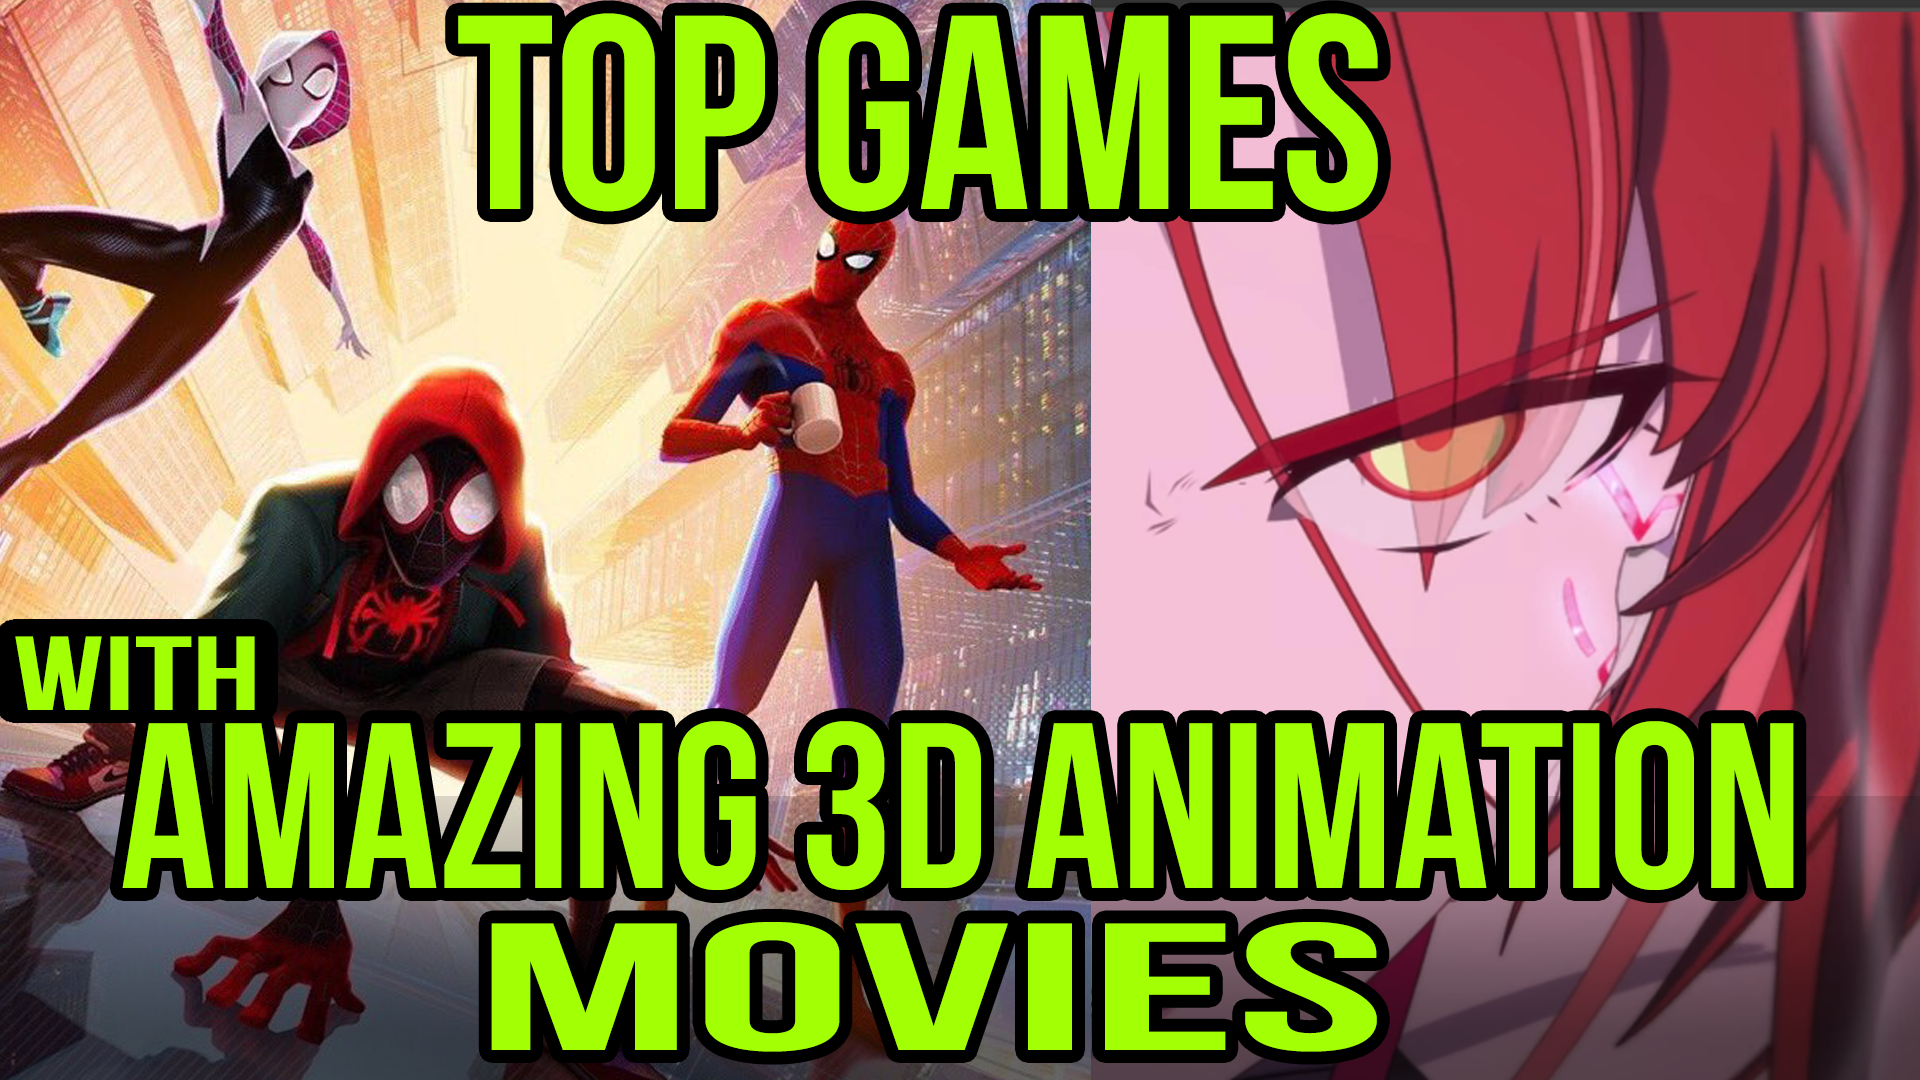 Top games with amazing 3d animation movies